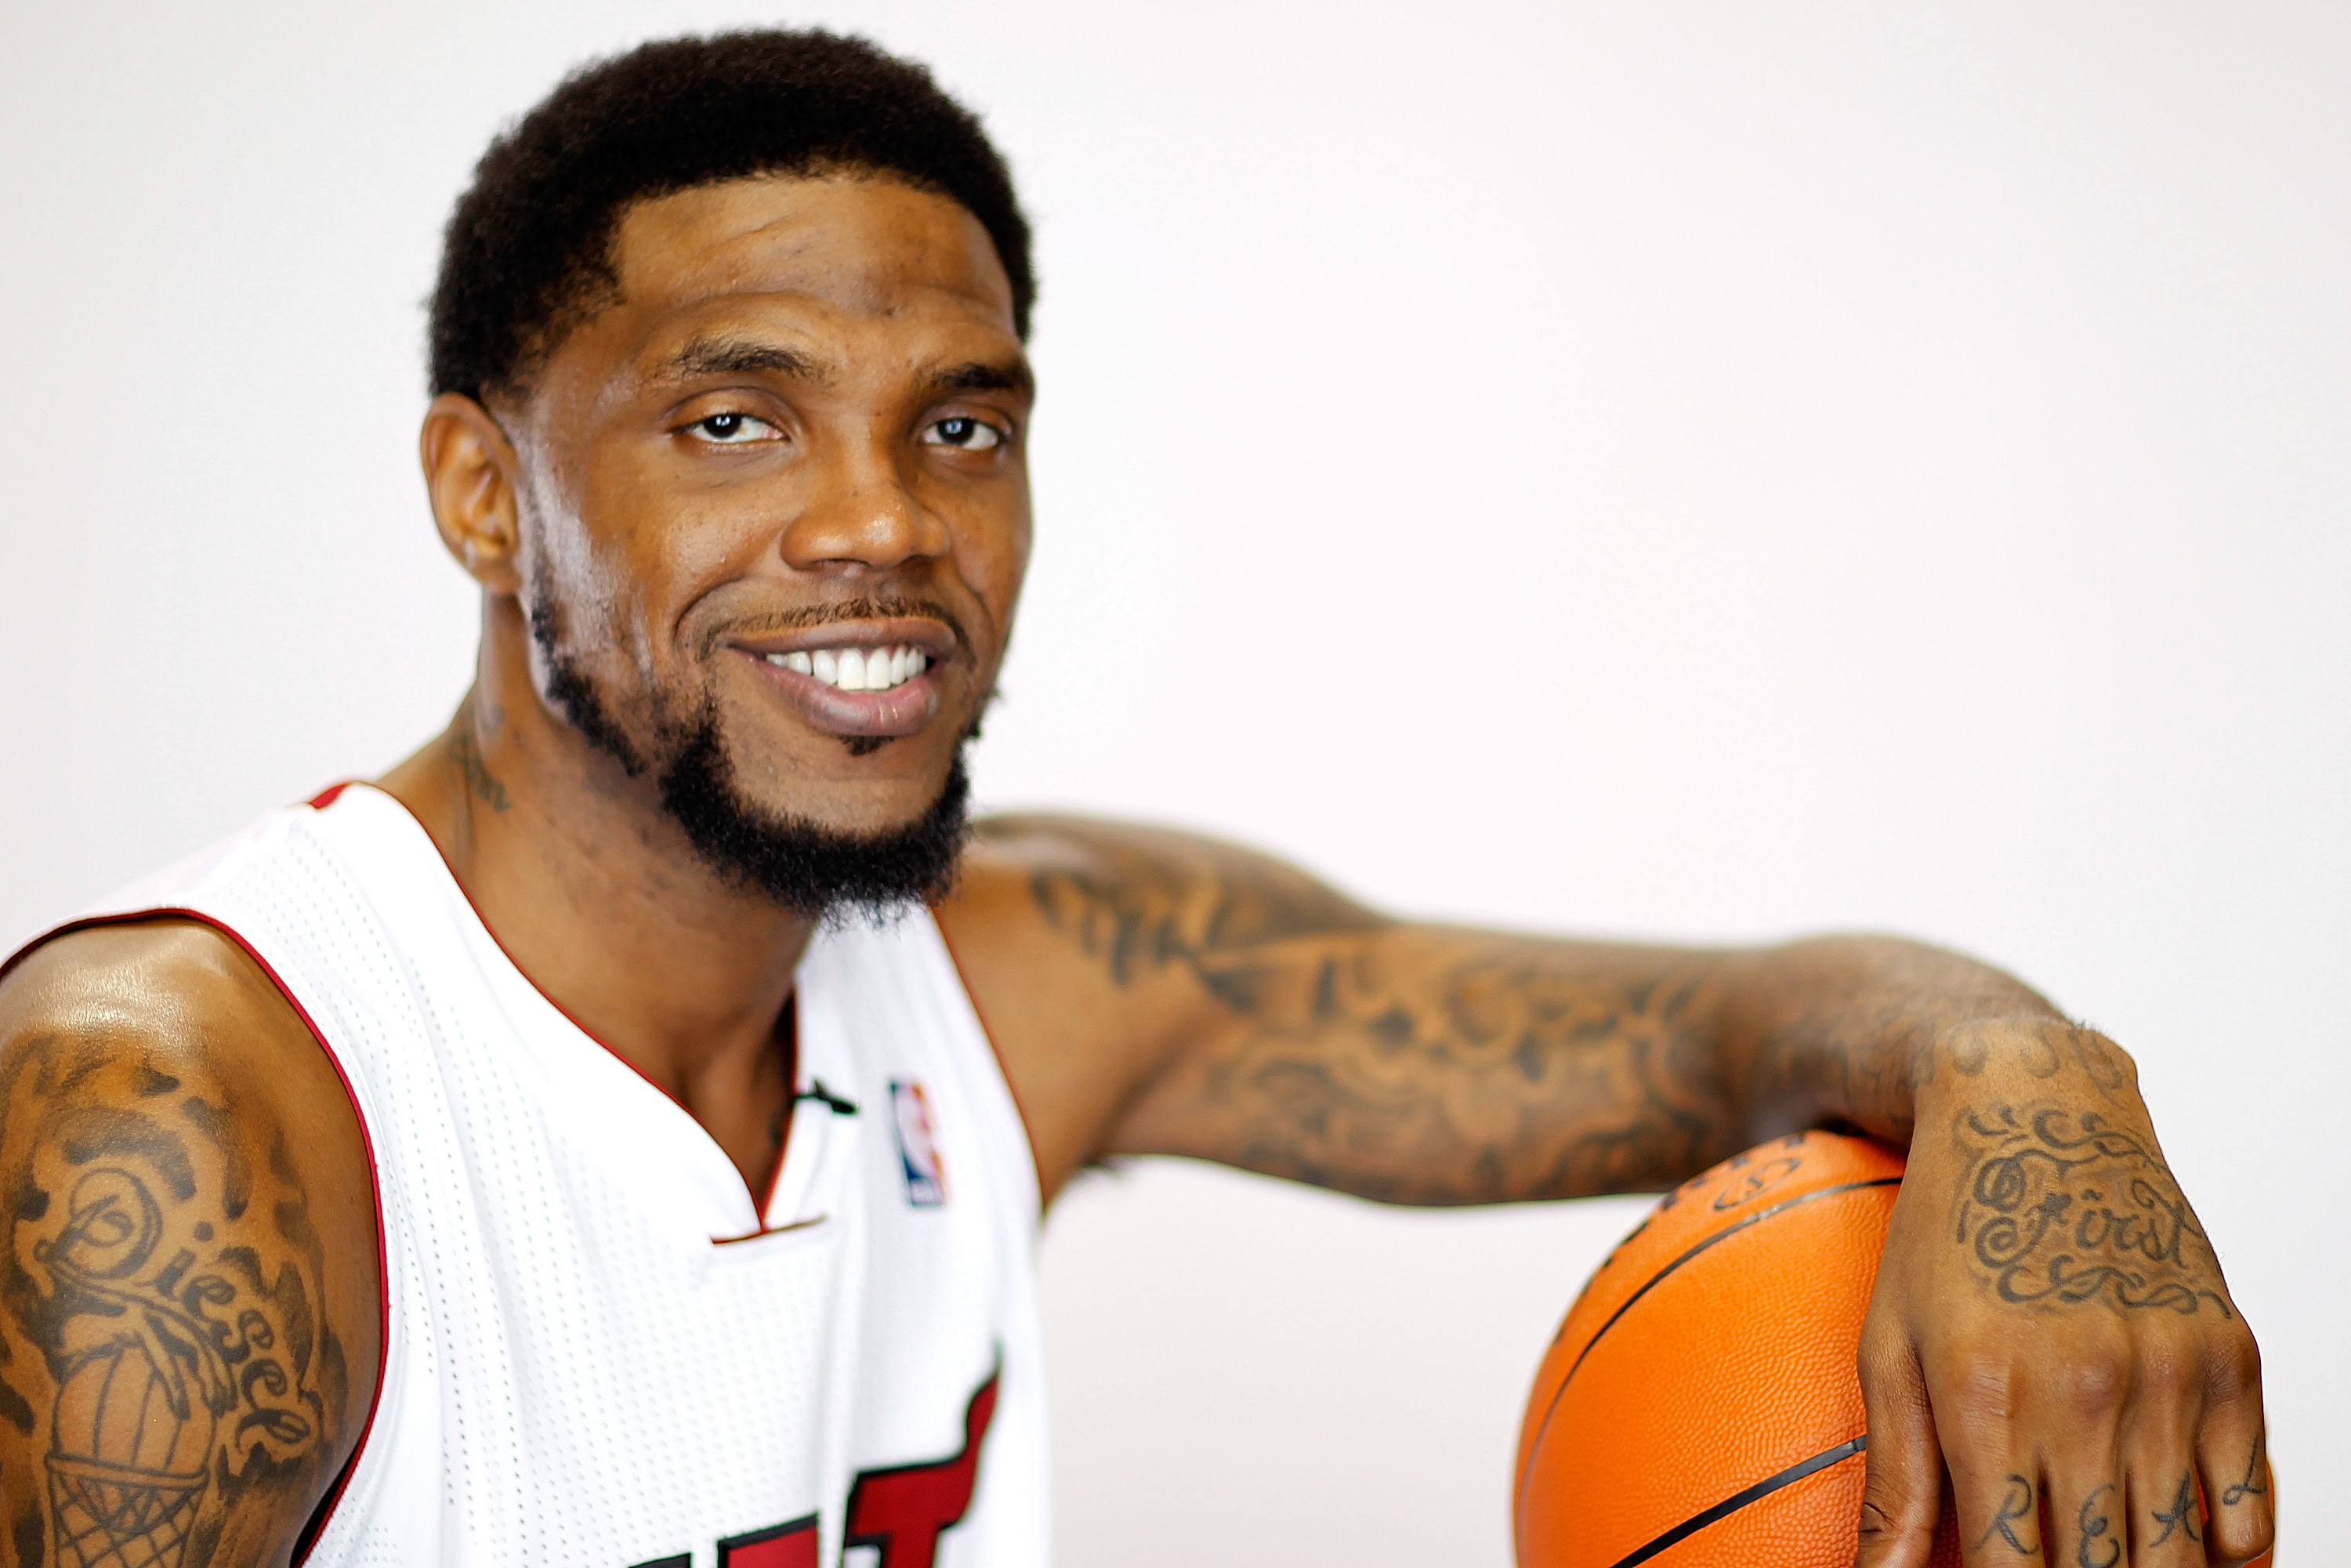 Udonis Haslem: The story behind the career of the Miami legend who became  the heart of Heat culture